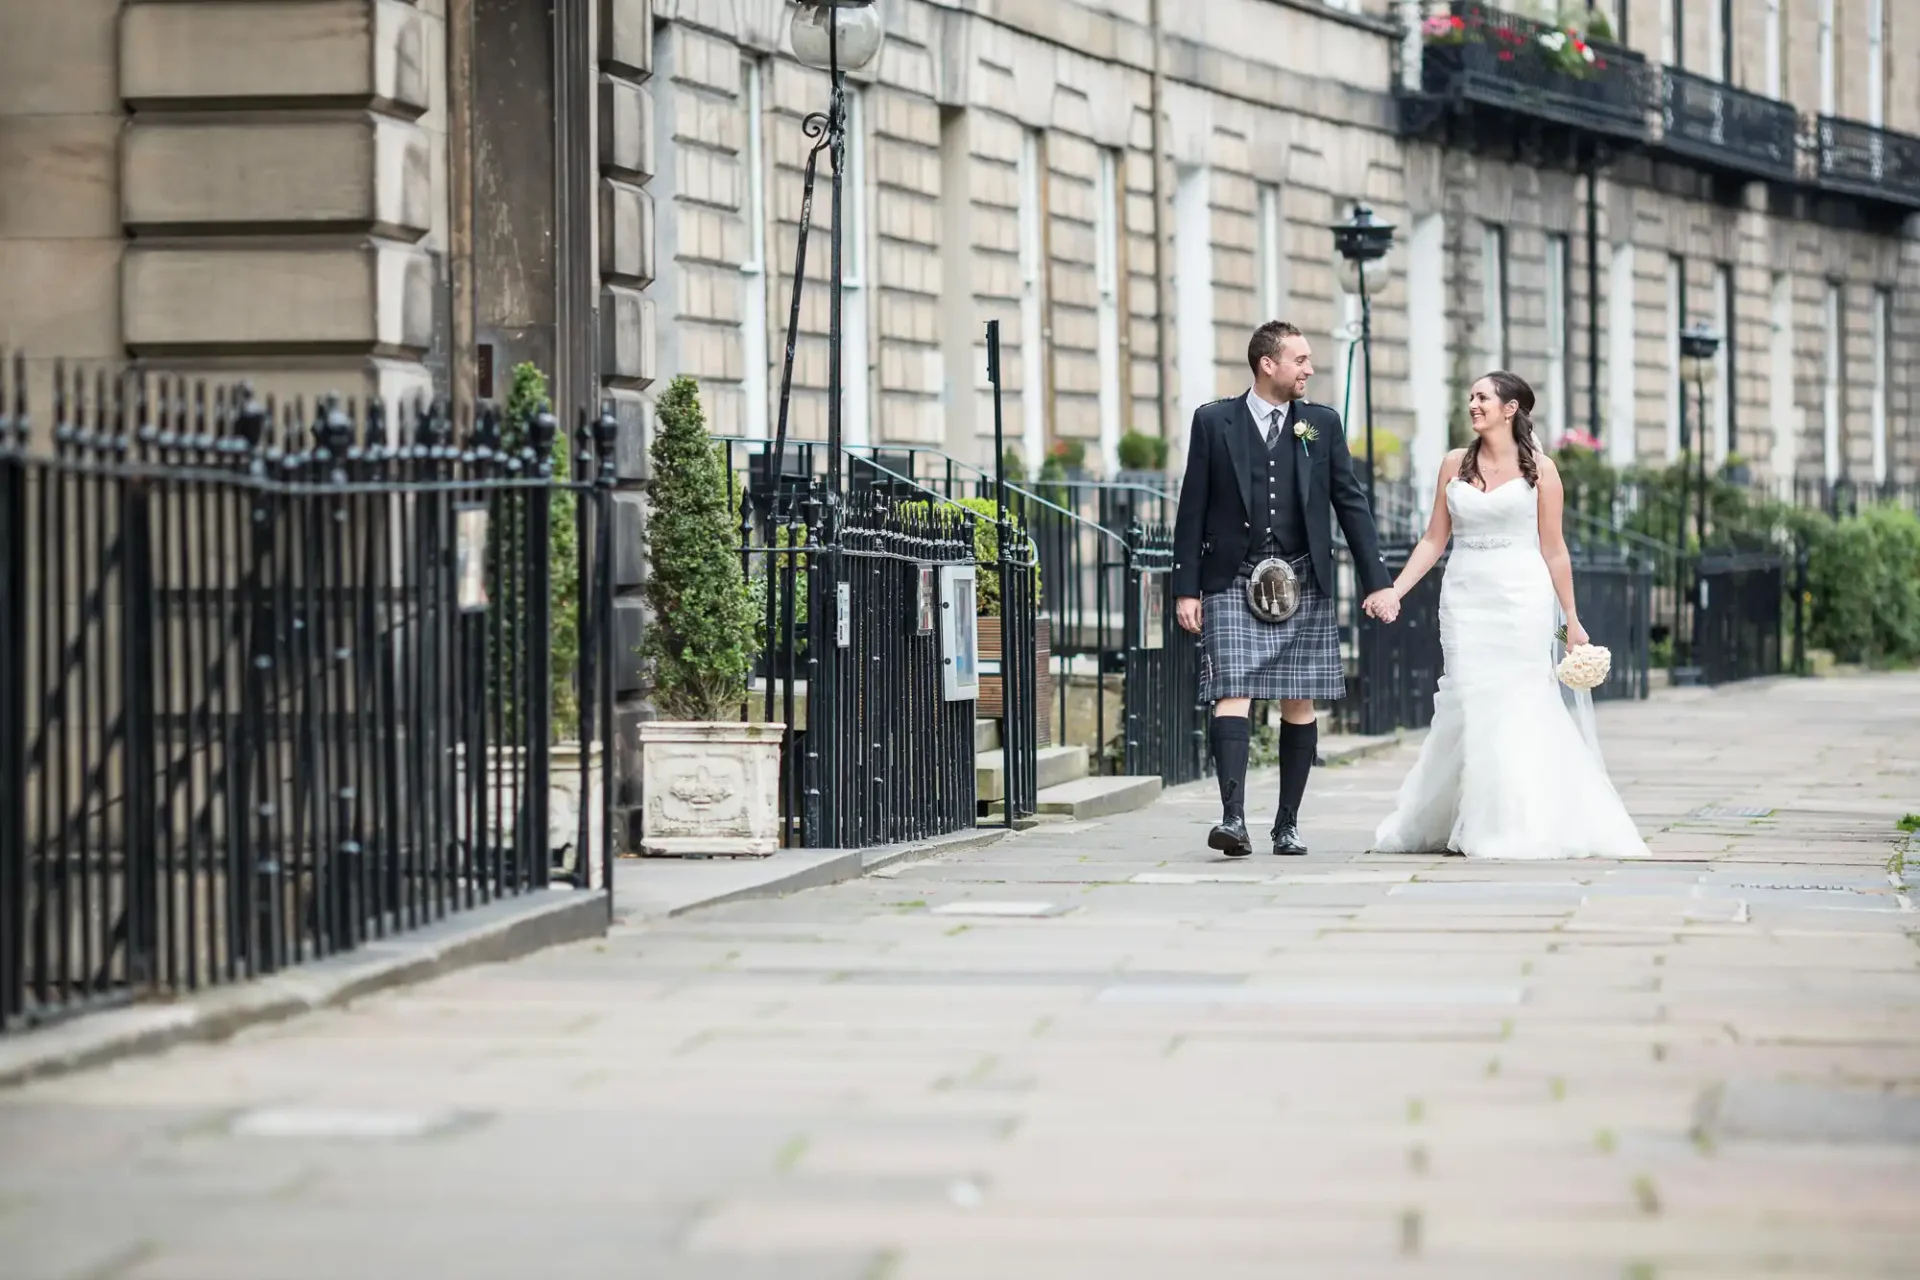 Bride and groom walking hand in hand along a city street, with the groom wearing a kilt and the bride in a white dress.